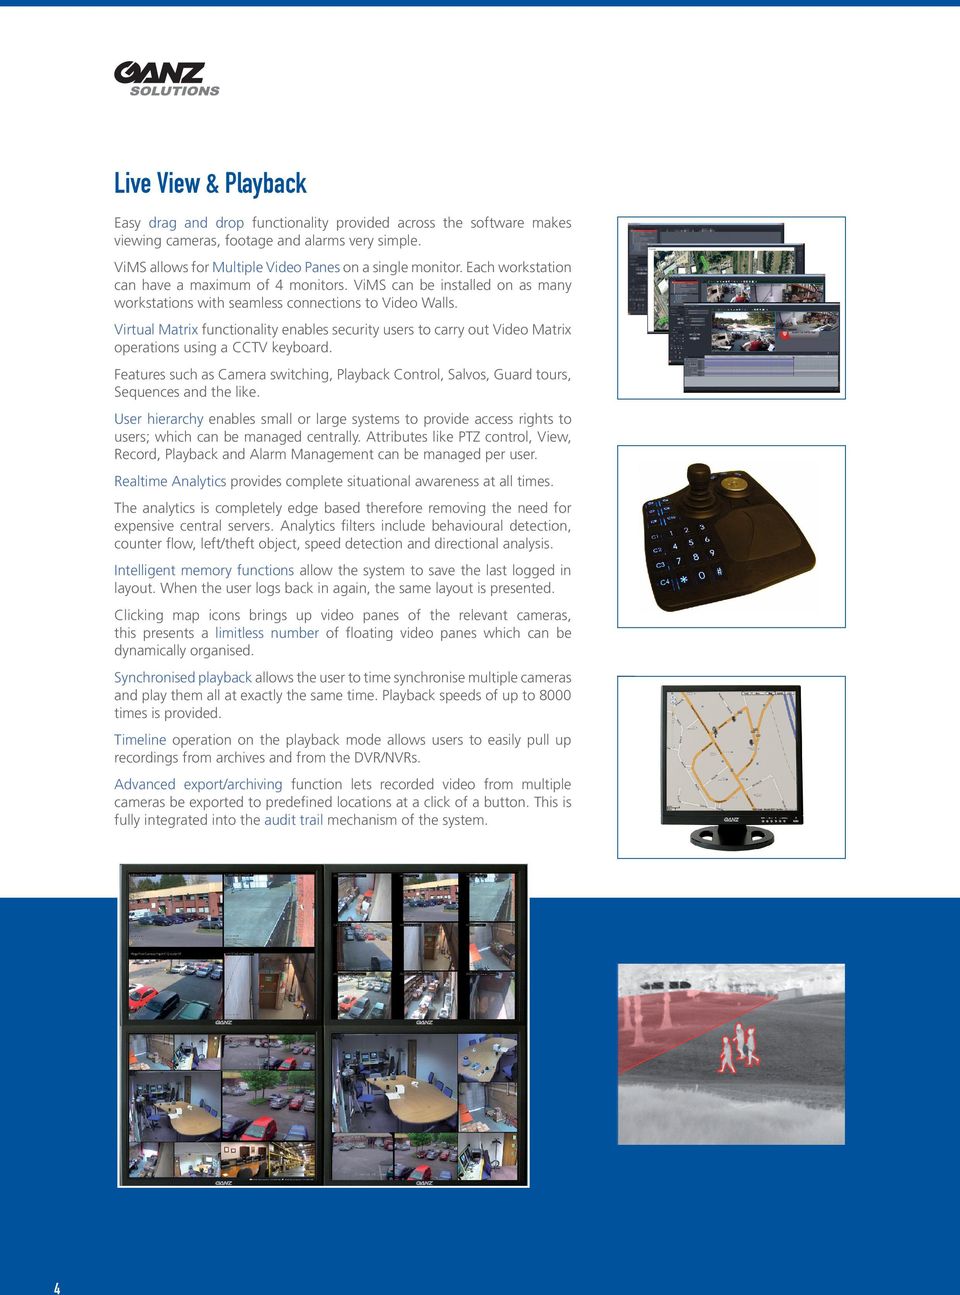 Virtual Matrix functionality enables security users to carry out Video Matrix operations using a CCTV keyboard.